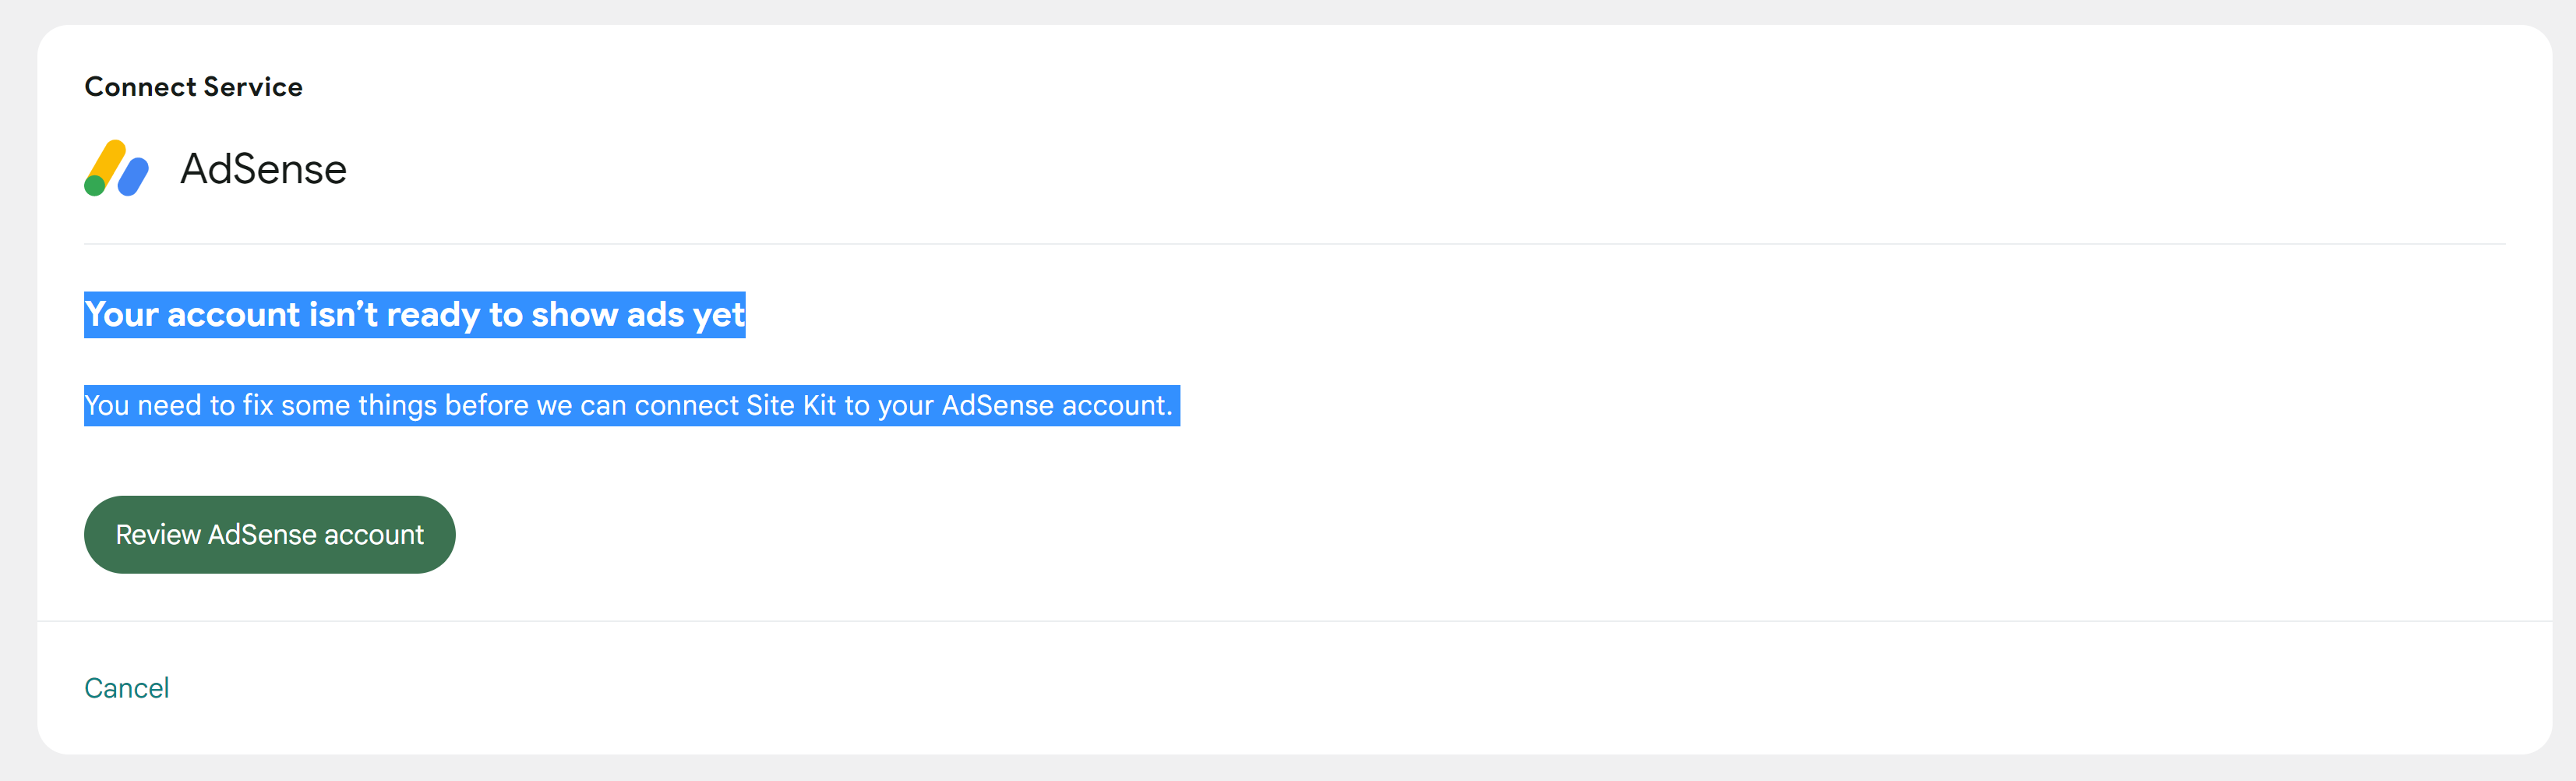 why still my channel not ready for payment - Google AdSense Community